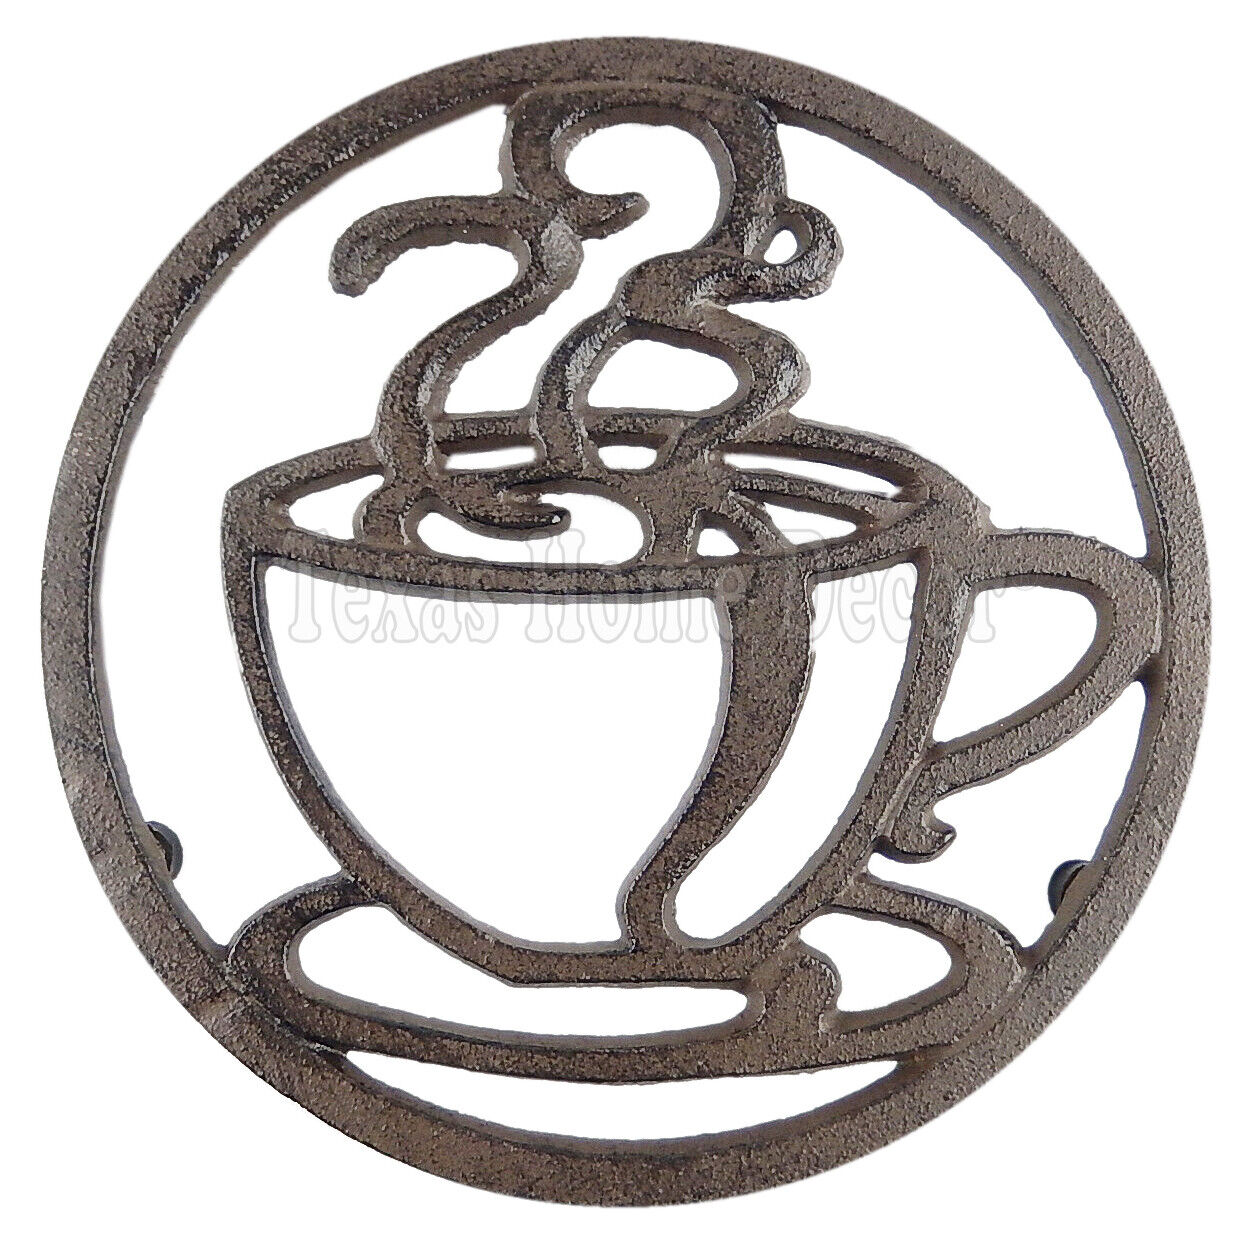 Coffee Cup Trivet Cast Iron Rustic Antique Style Hot Pot Plate Holder Round 